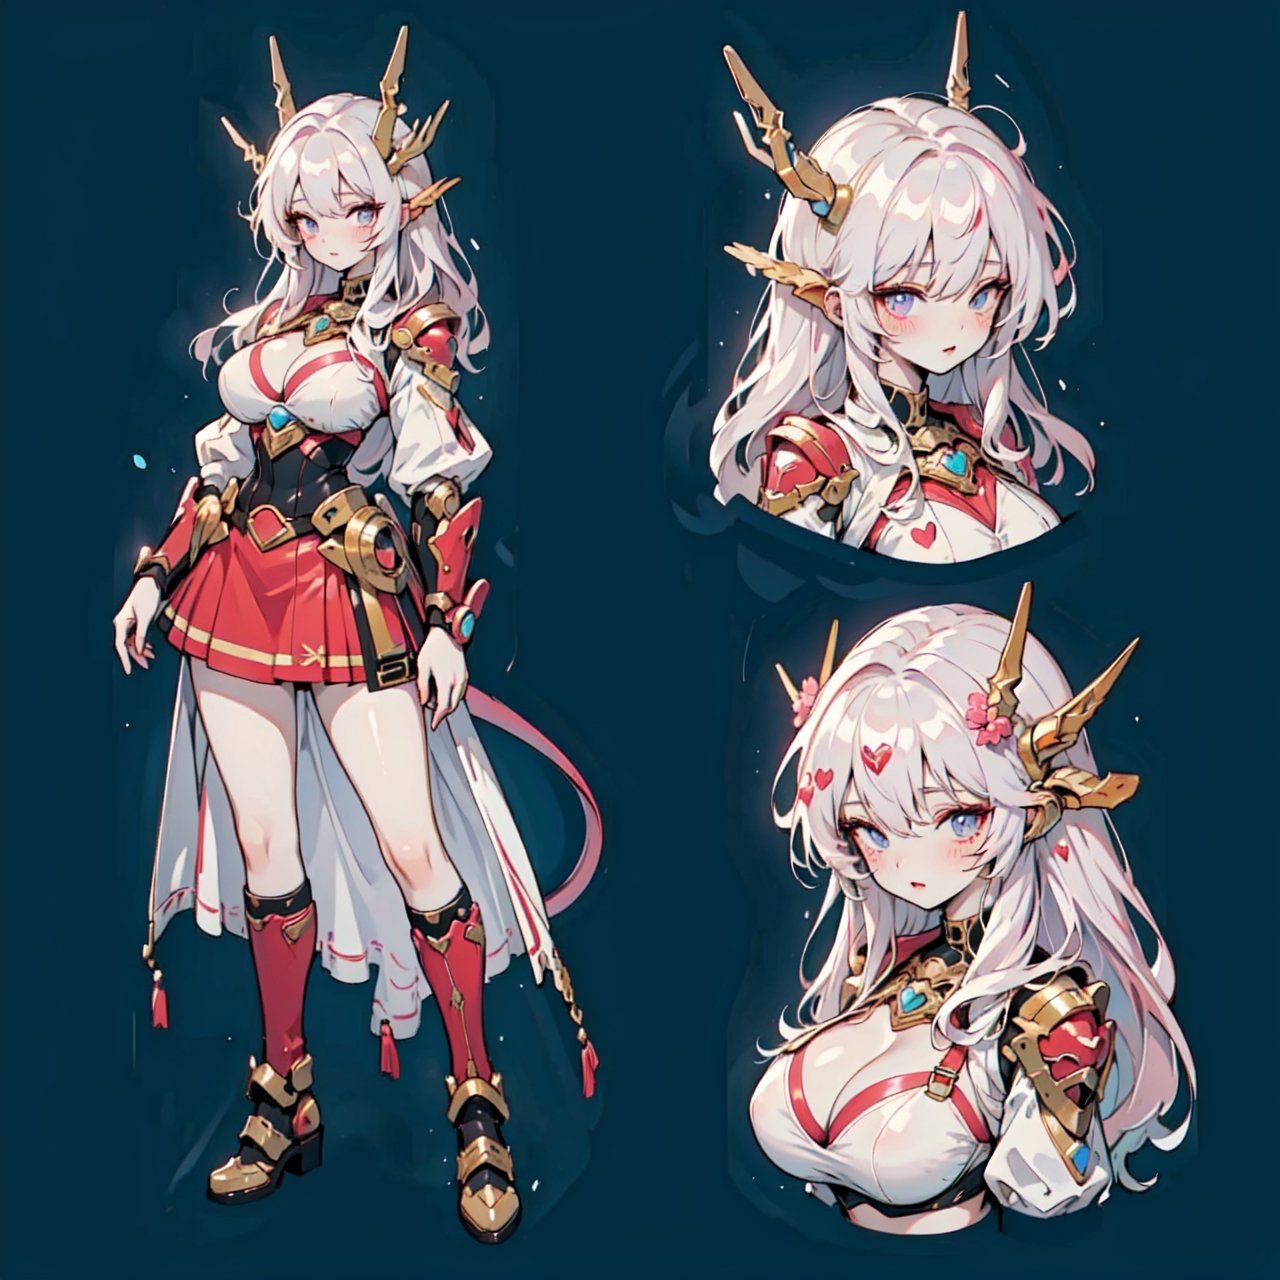 anime, front and rear design, custom character,  character design, full body, big boobies, big breast, (CharacterSheet:1), design(masterpiece, top quality, best quality, official art, beautiful and aesthetic:1.2 ), (1girl), extreme detailed, (fractal art:1.3), highest detailed, 1 girl, YAMATO,  medieval armor,  female armor,  cleavage, heart in eye, huge breasts, miniskirt, bra,mink_\(dragon half),bikini armor, mecha